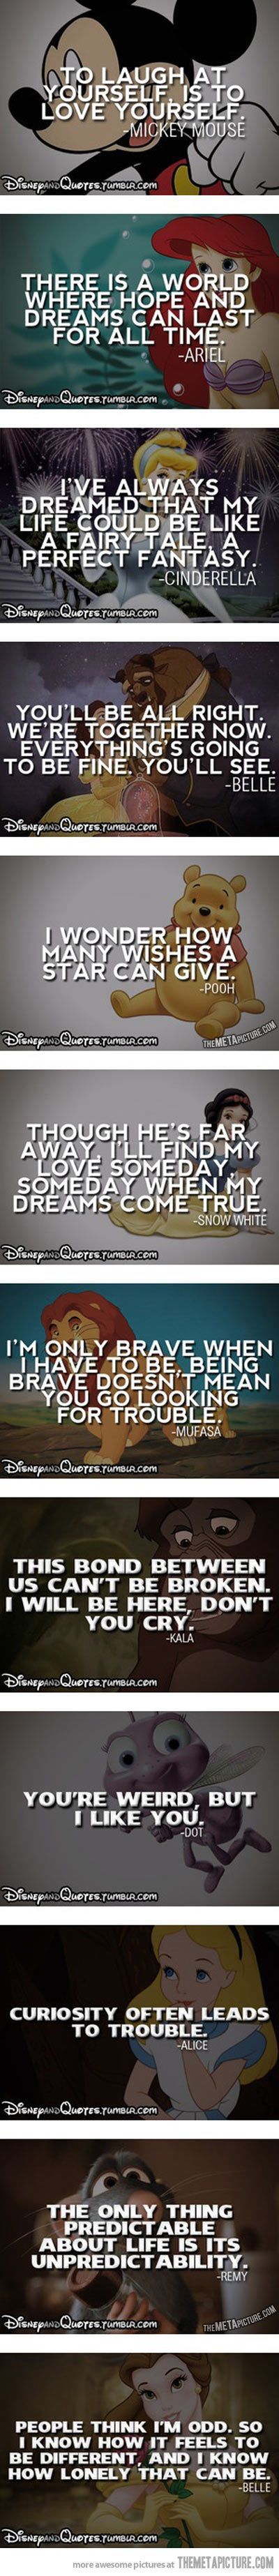 Disney Character Quotes II How characters are used to represent ideals and beliefs of the maker in movies~